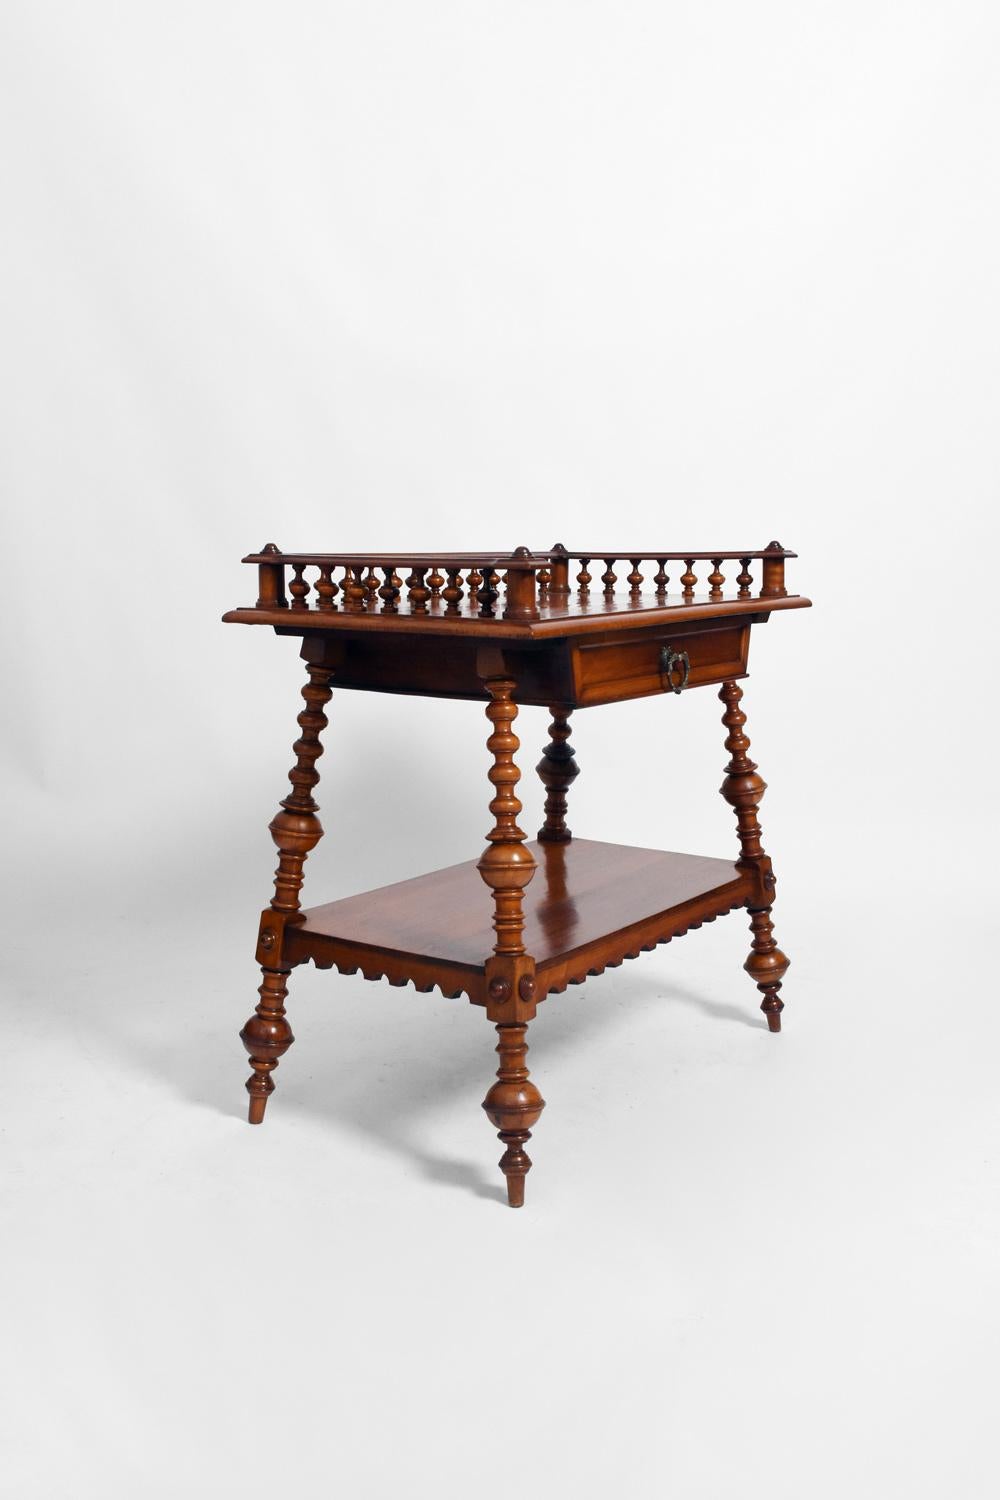 Console table in turned wood resting on four tapered legs, a frieze drawer under the top. England, late 19th century.